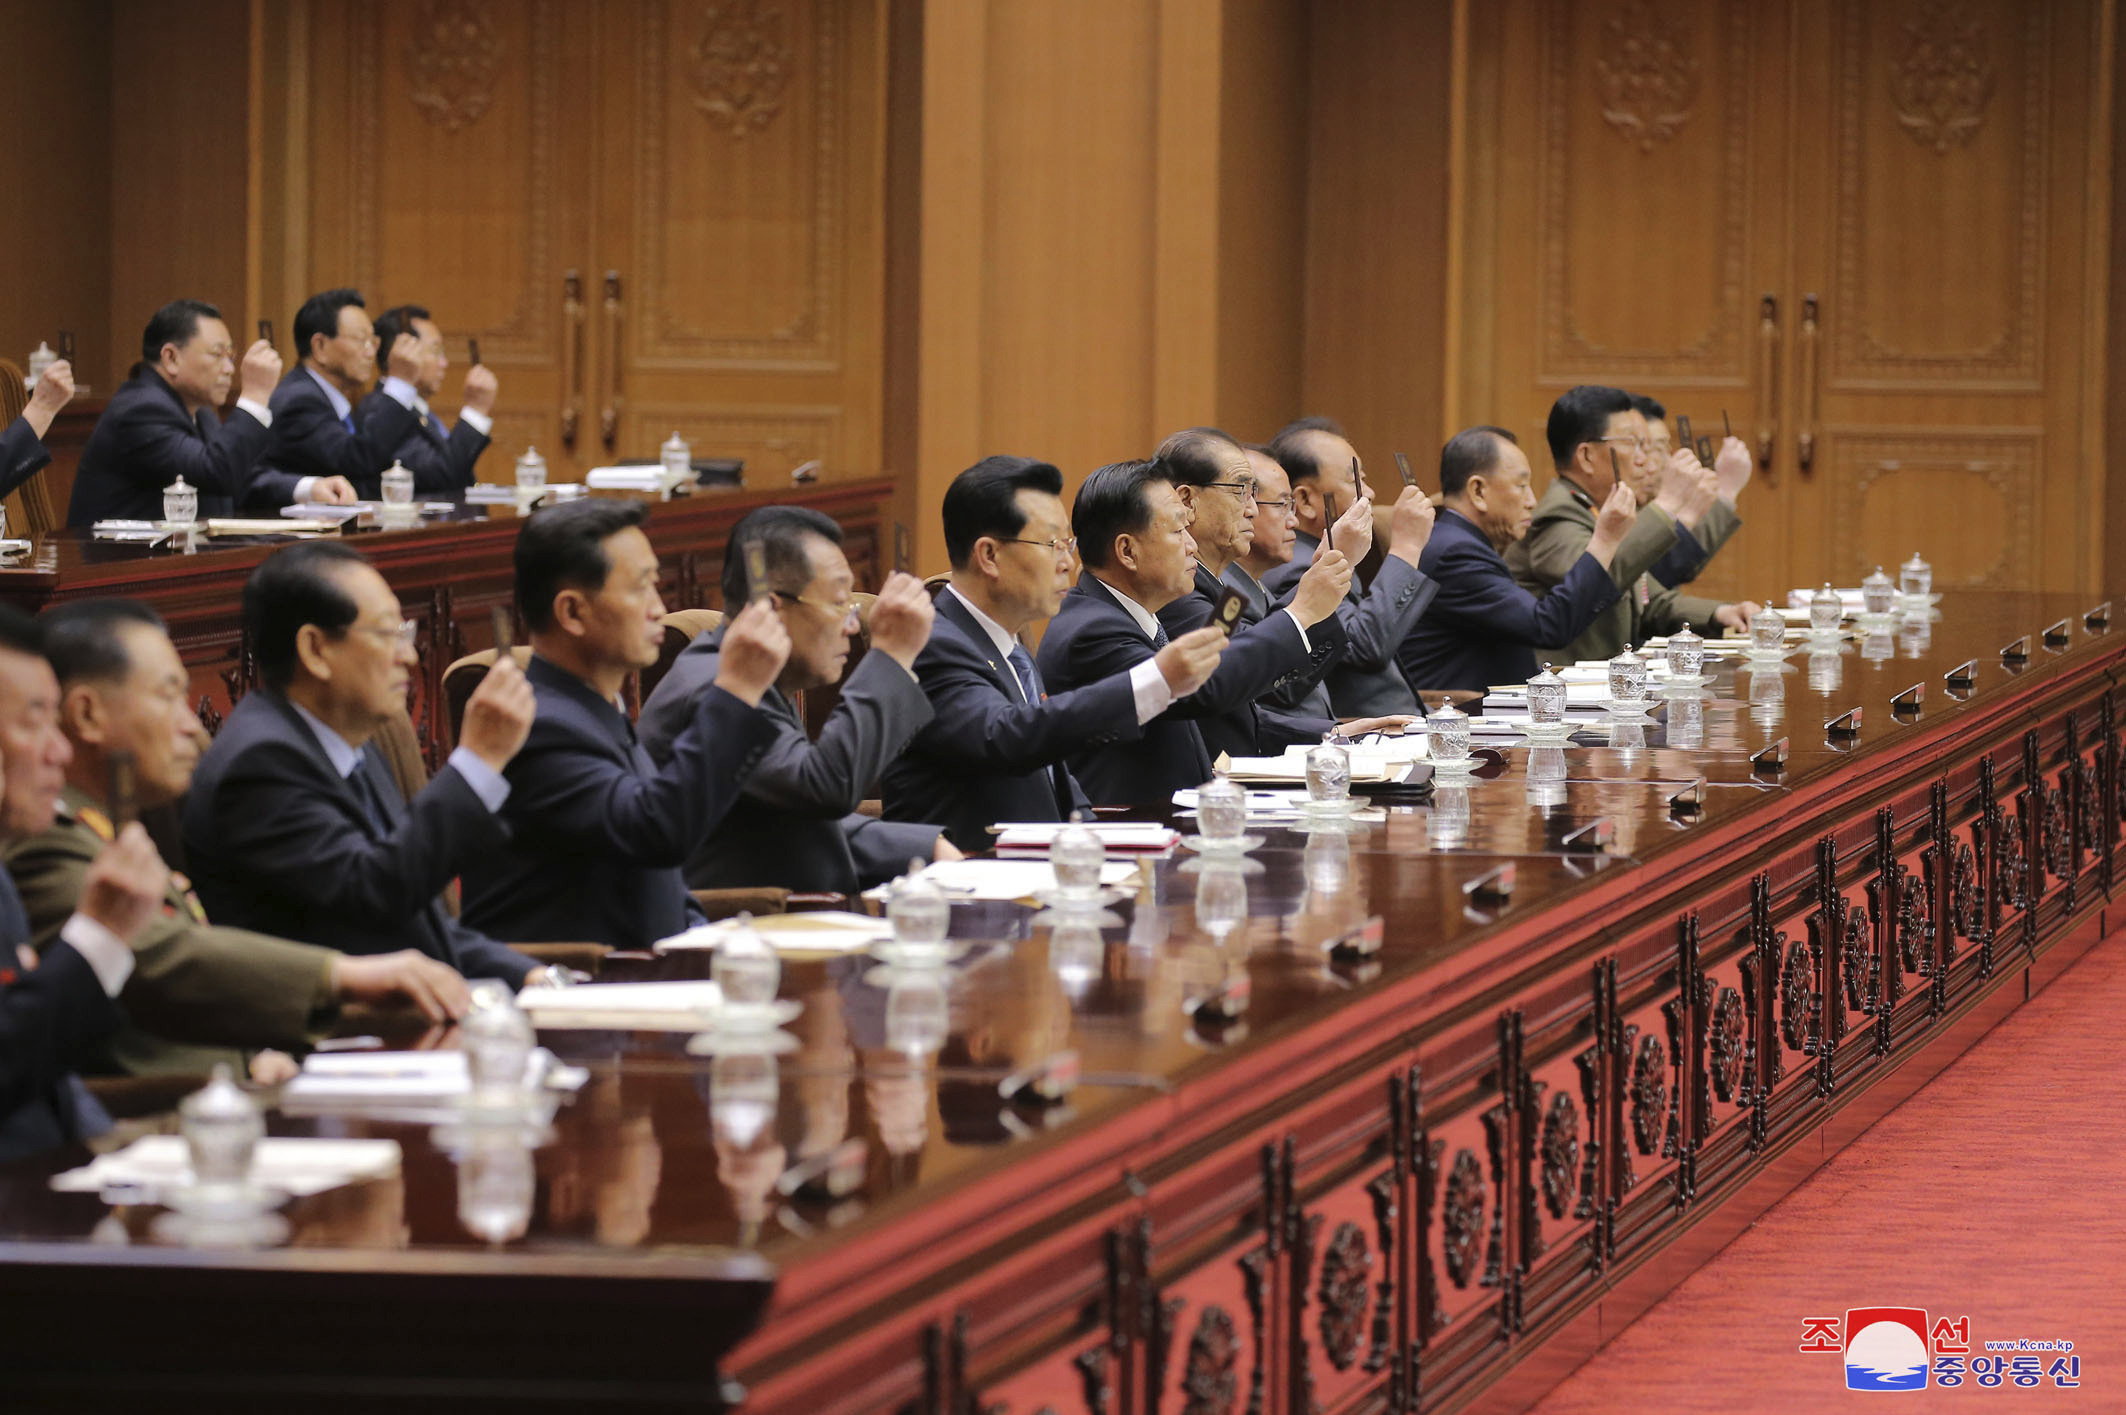 This April 12 photo, provided by the North Korean government on April 13, shows a session of North Korea's parliament in Pyongyang. Independent journalists were not given access to cover the event depicted in this image, and the content of this image is as provided and cannot be independently verified.